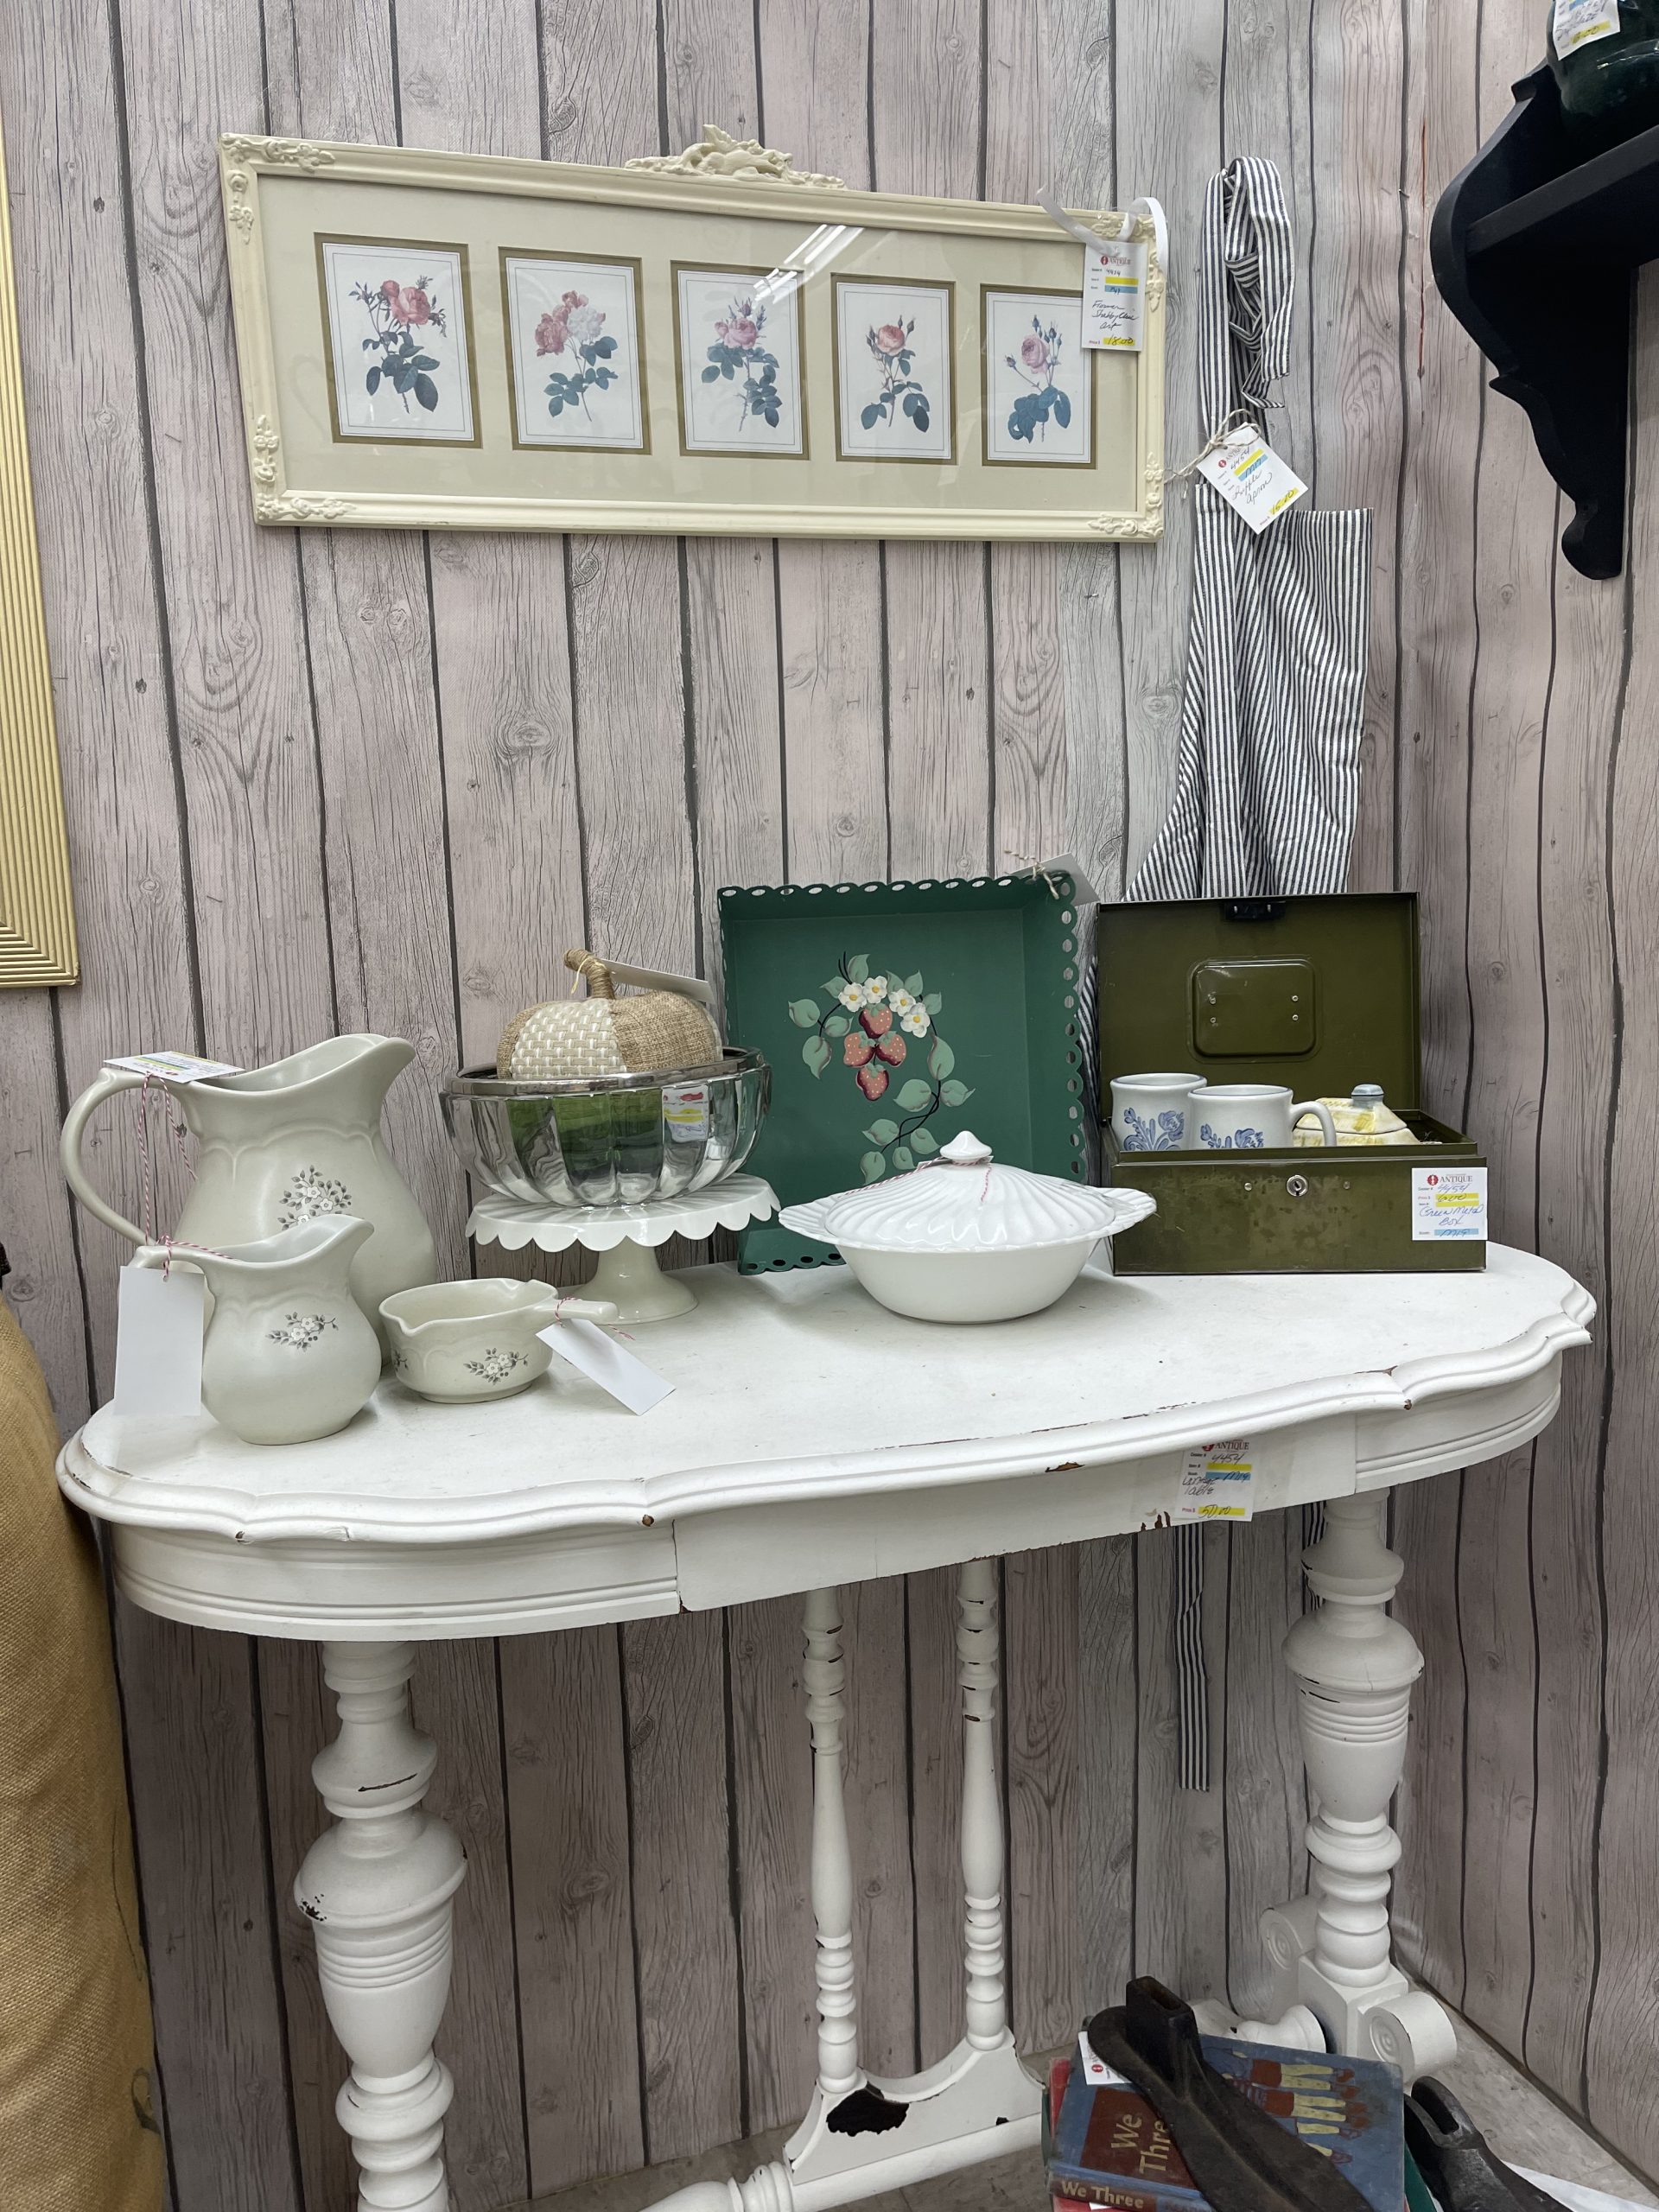 Booth Refresh Antique Store ~ White Cottage Home & Living